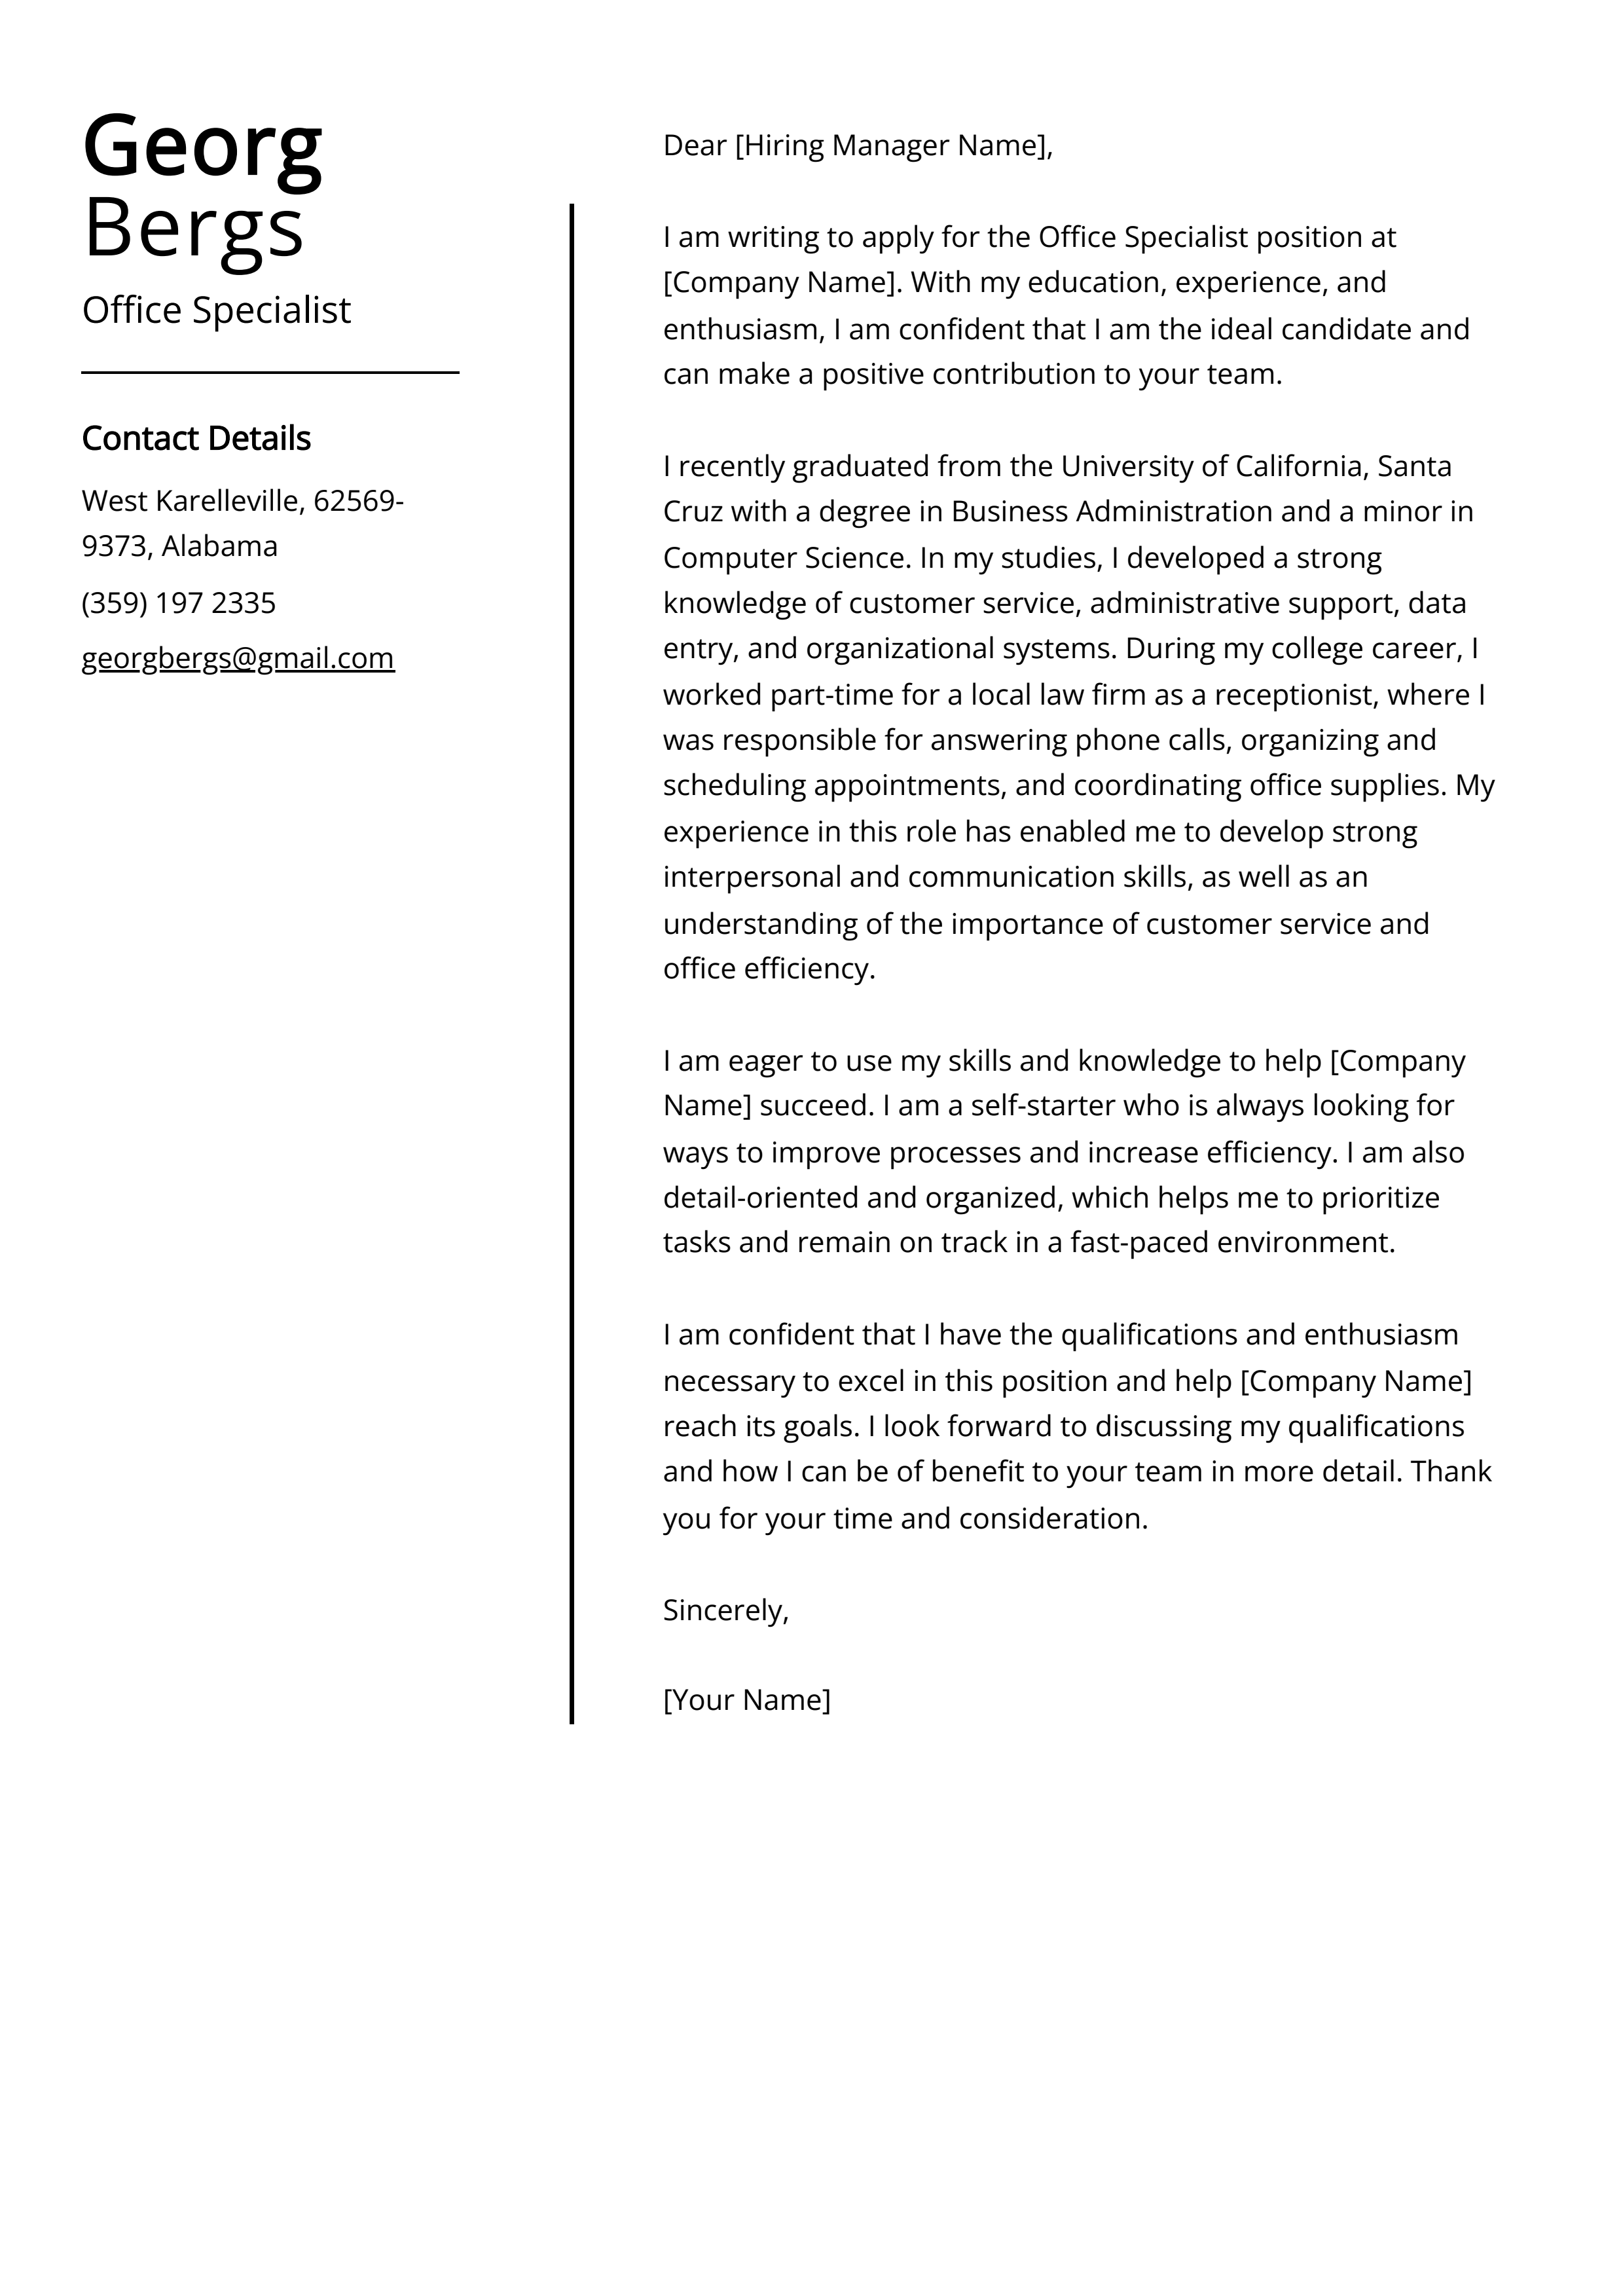 Office Specialist Cover Letter Example